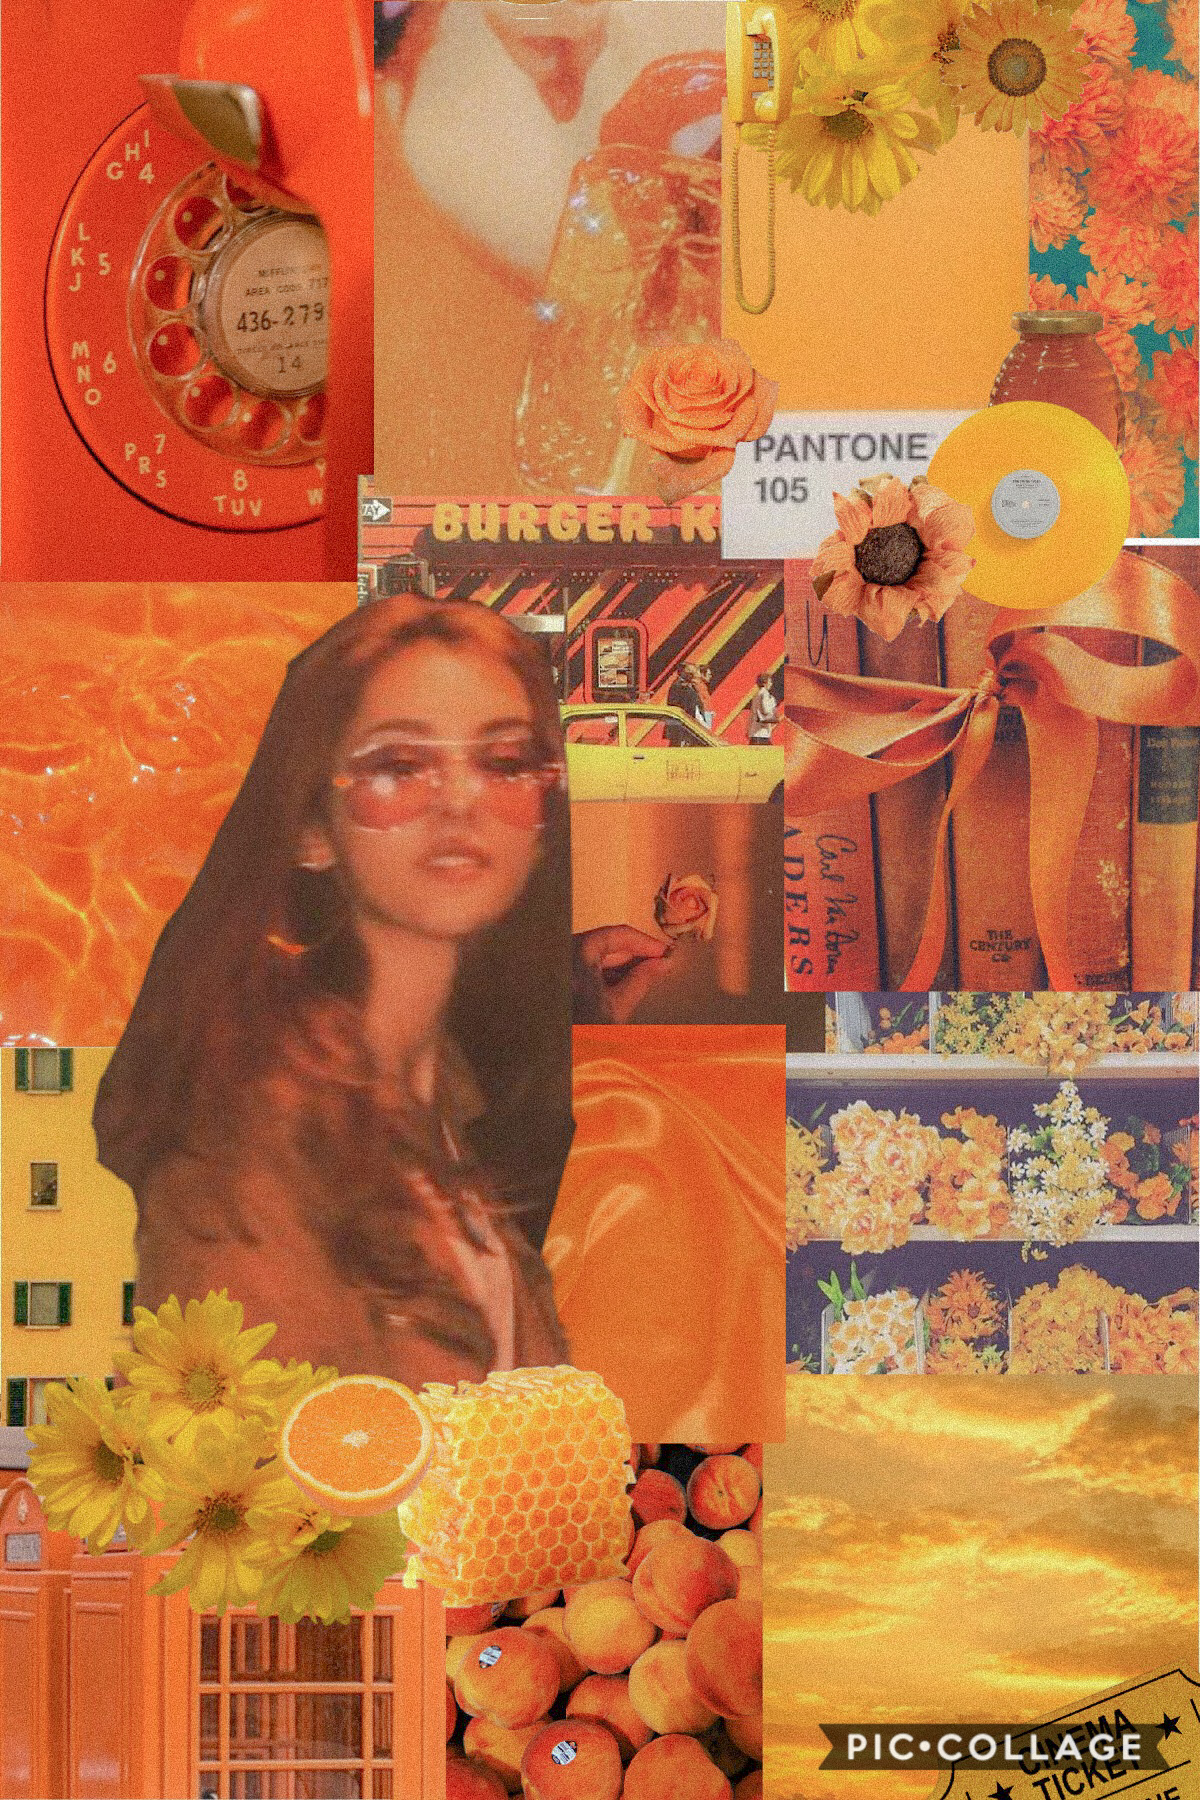 ☄️tap☄️

here is a late night yellow/orange collage!  hope you like it!
8/22/20